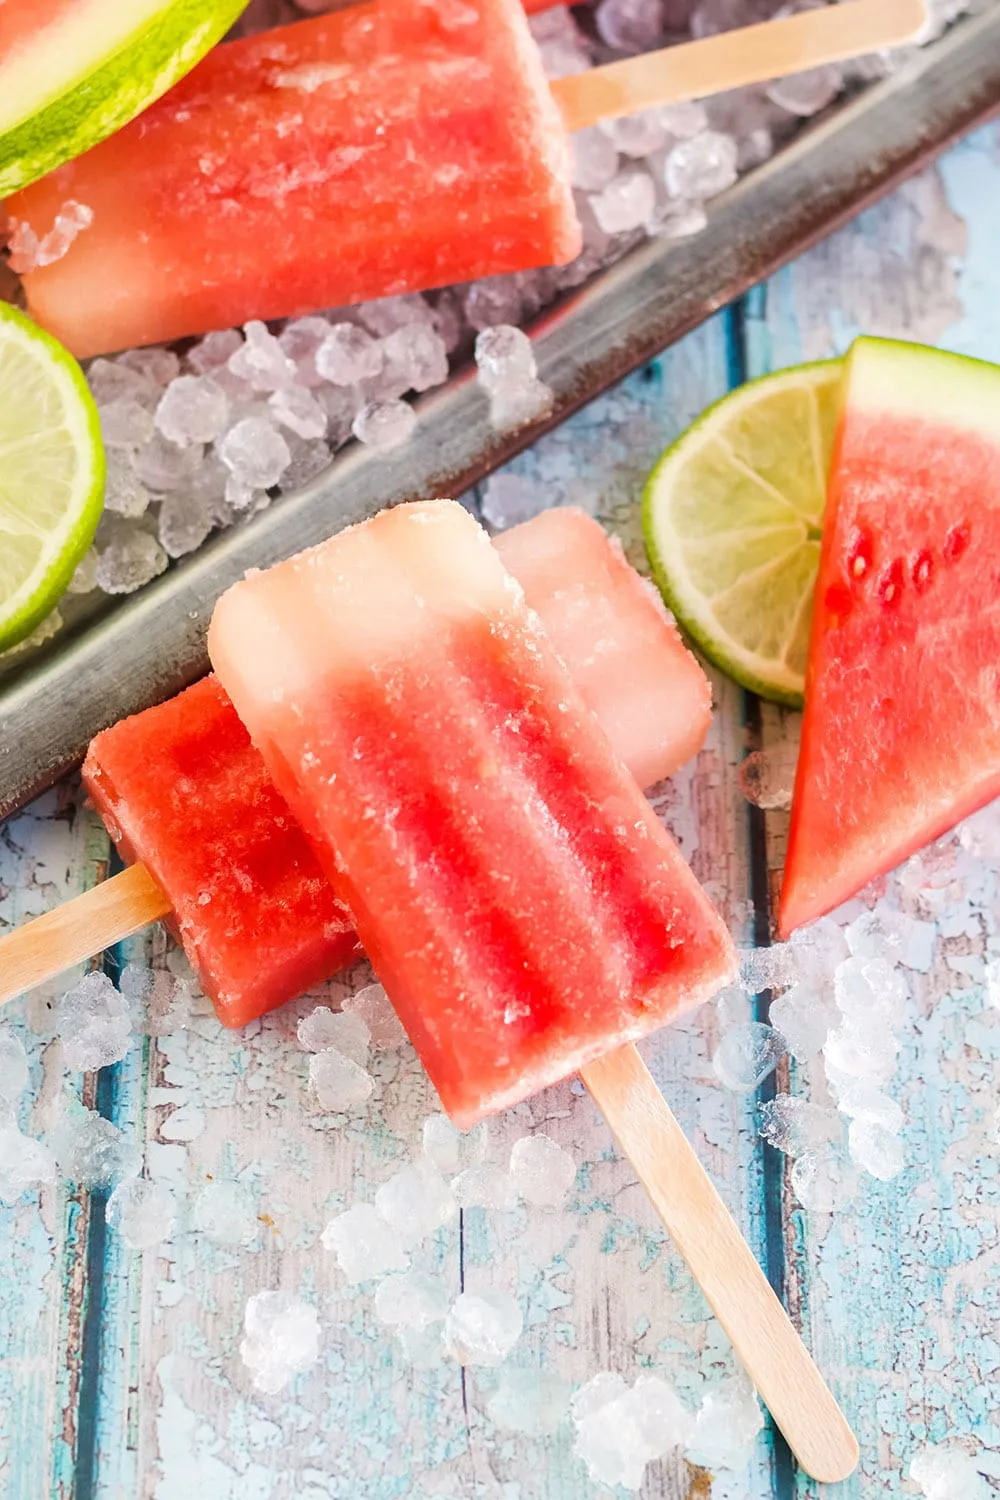 Popsicles on a table next to watermelon.